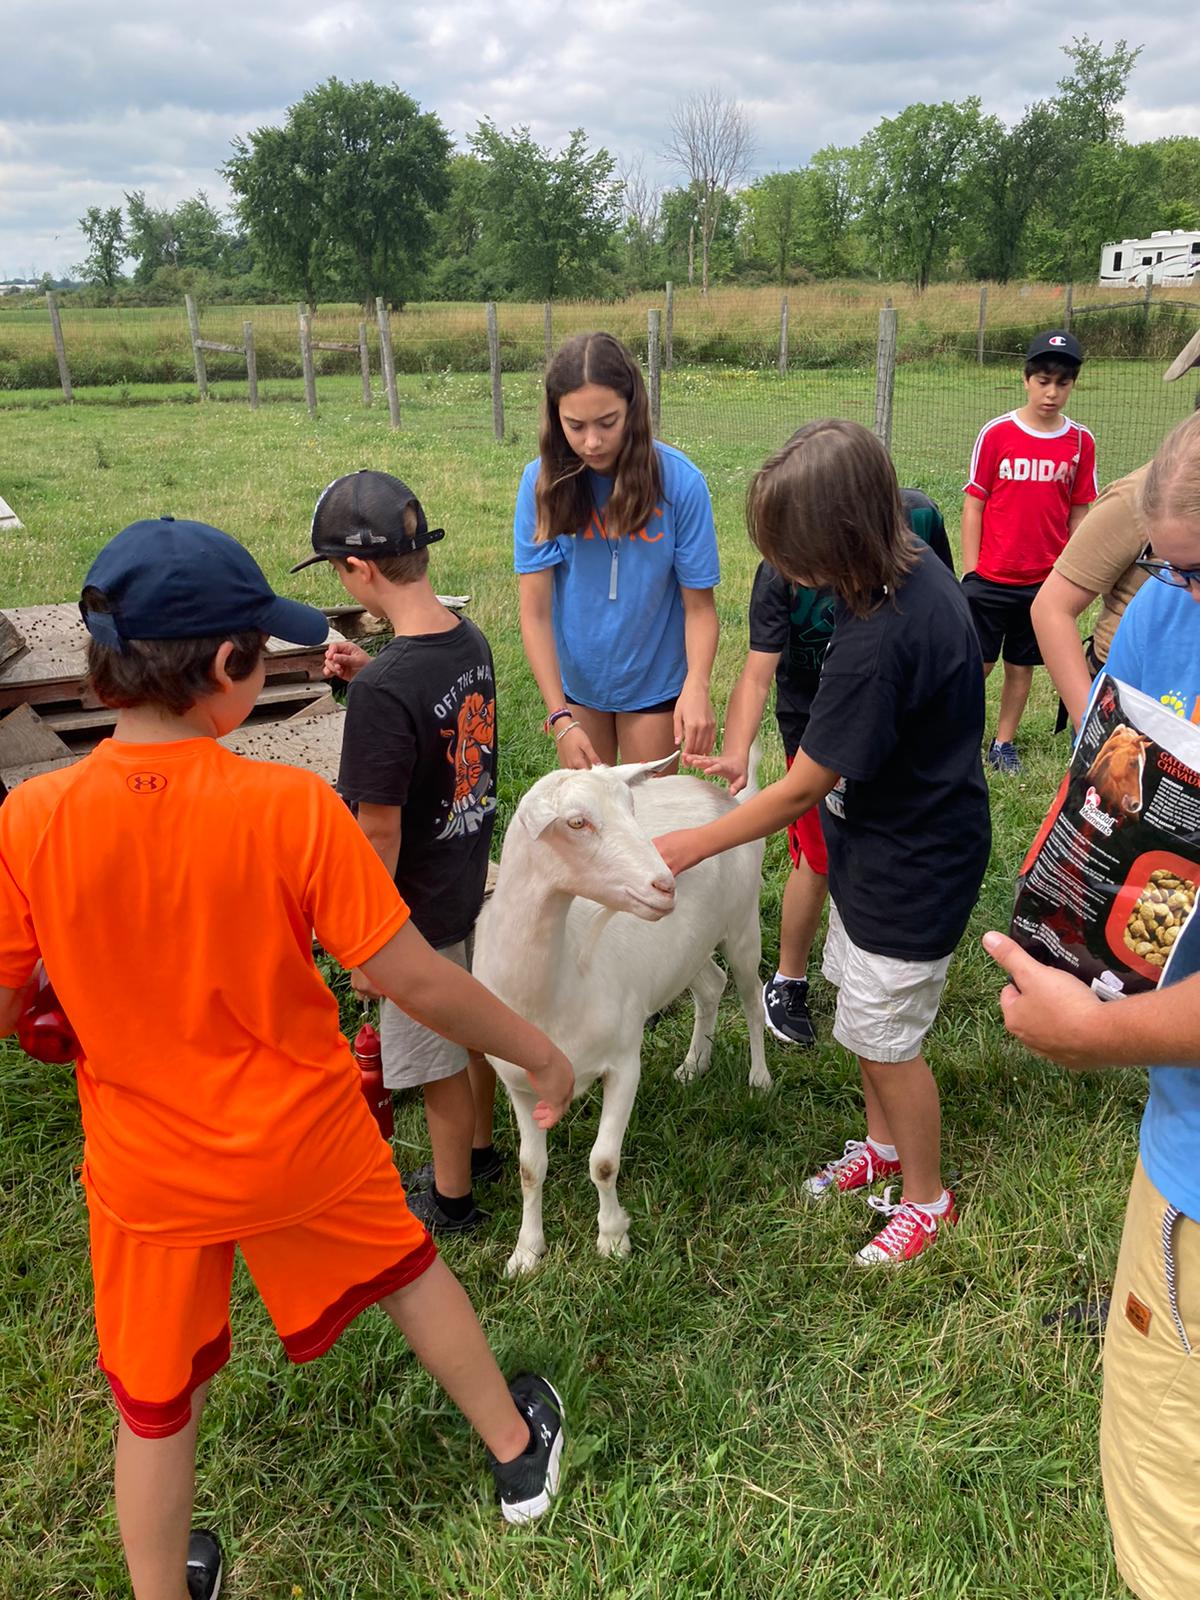 Campers feeding the goat